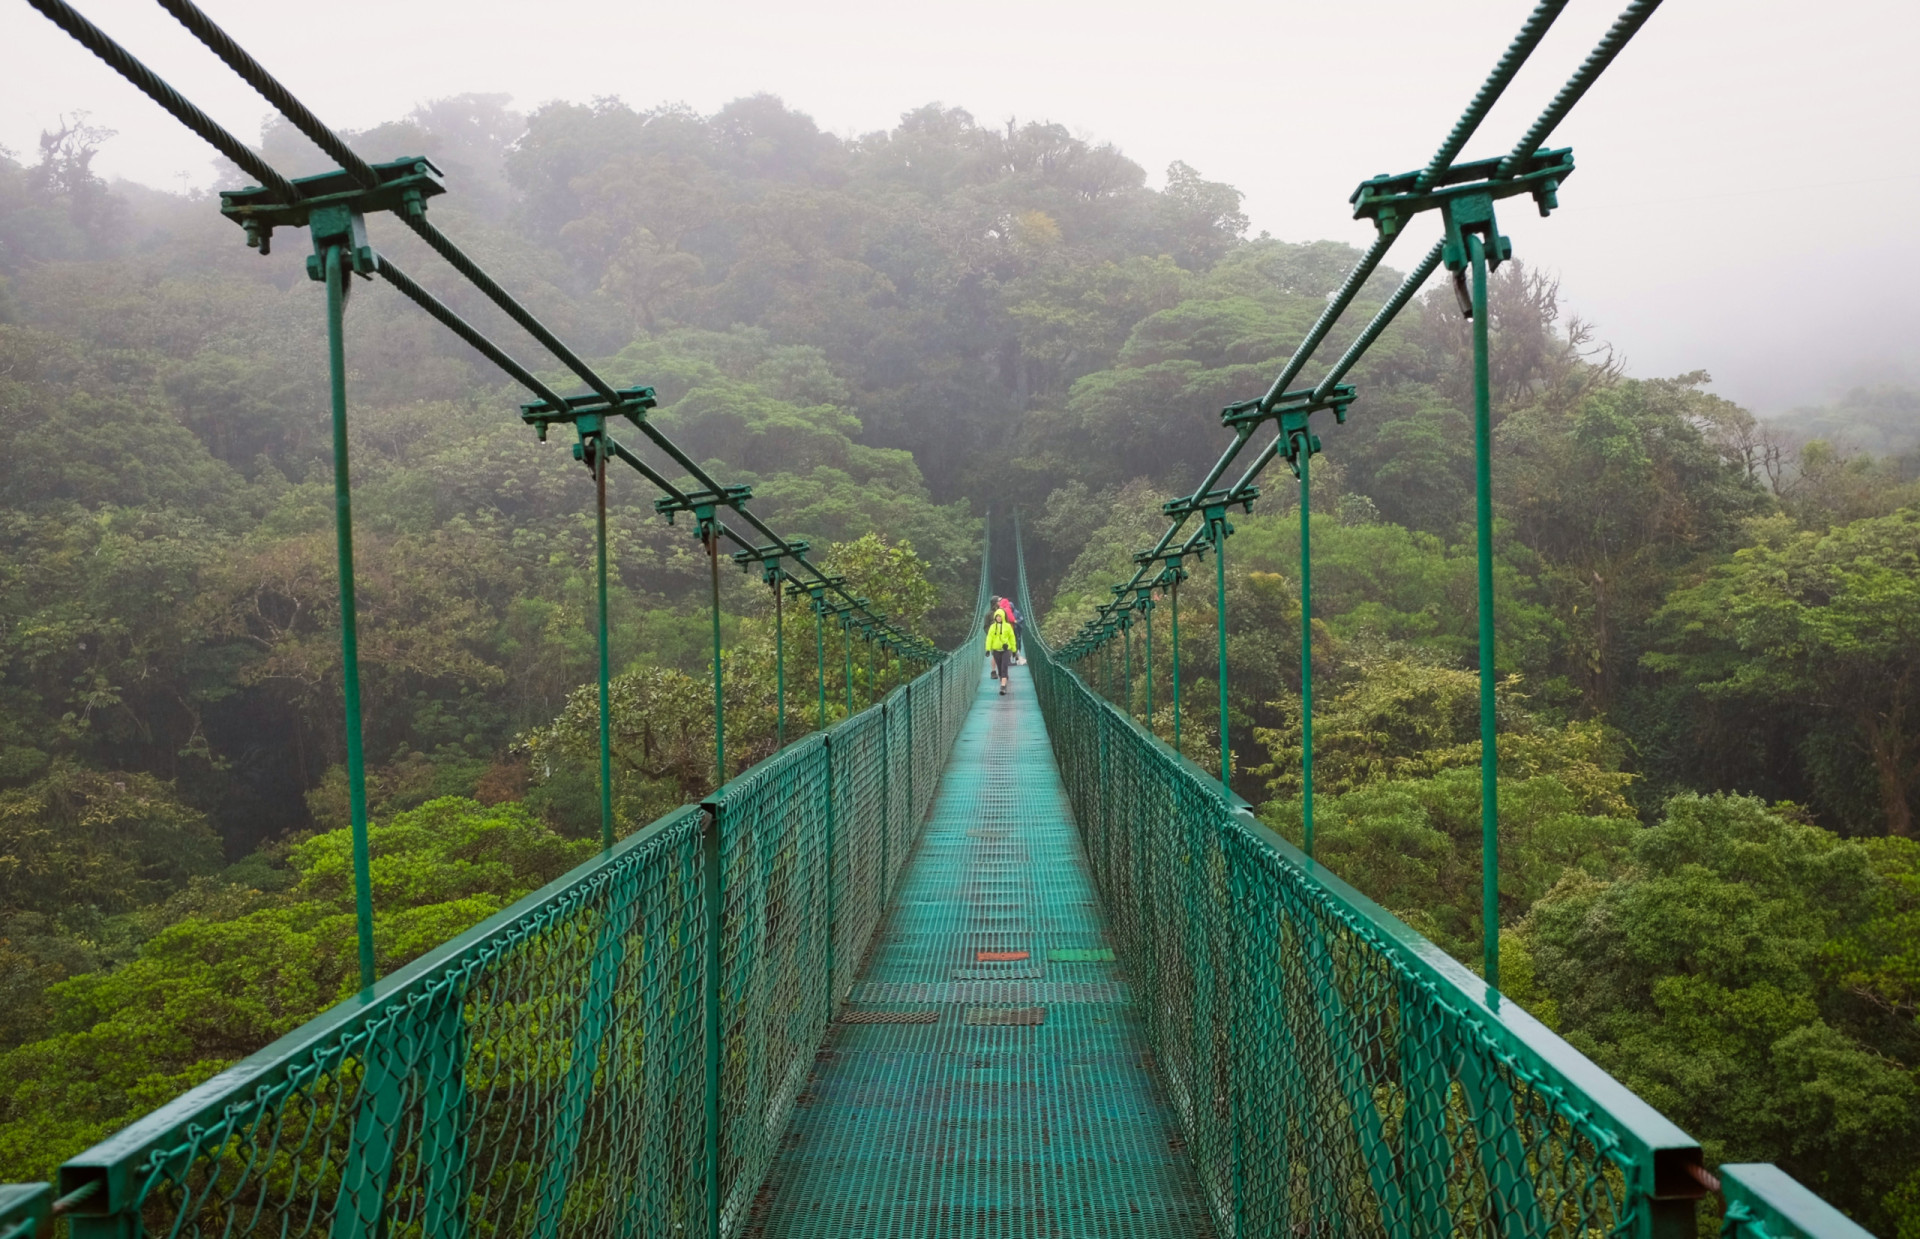 <p>A must-do for anyone visiting Costa Rica is to take a canopy tour following the suspension bridges set within the incredible Monteverde Cloud Forest. You'll wander through fog and low-hanging cloud cover and get thoroughly damp in the process, but come away with a truly memorable travel experience.</p>